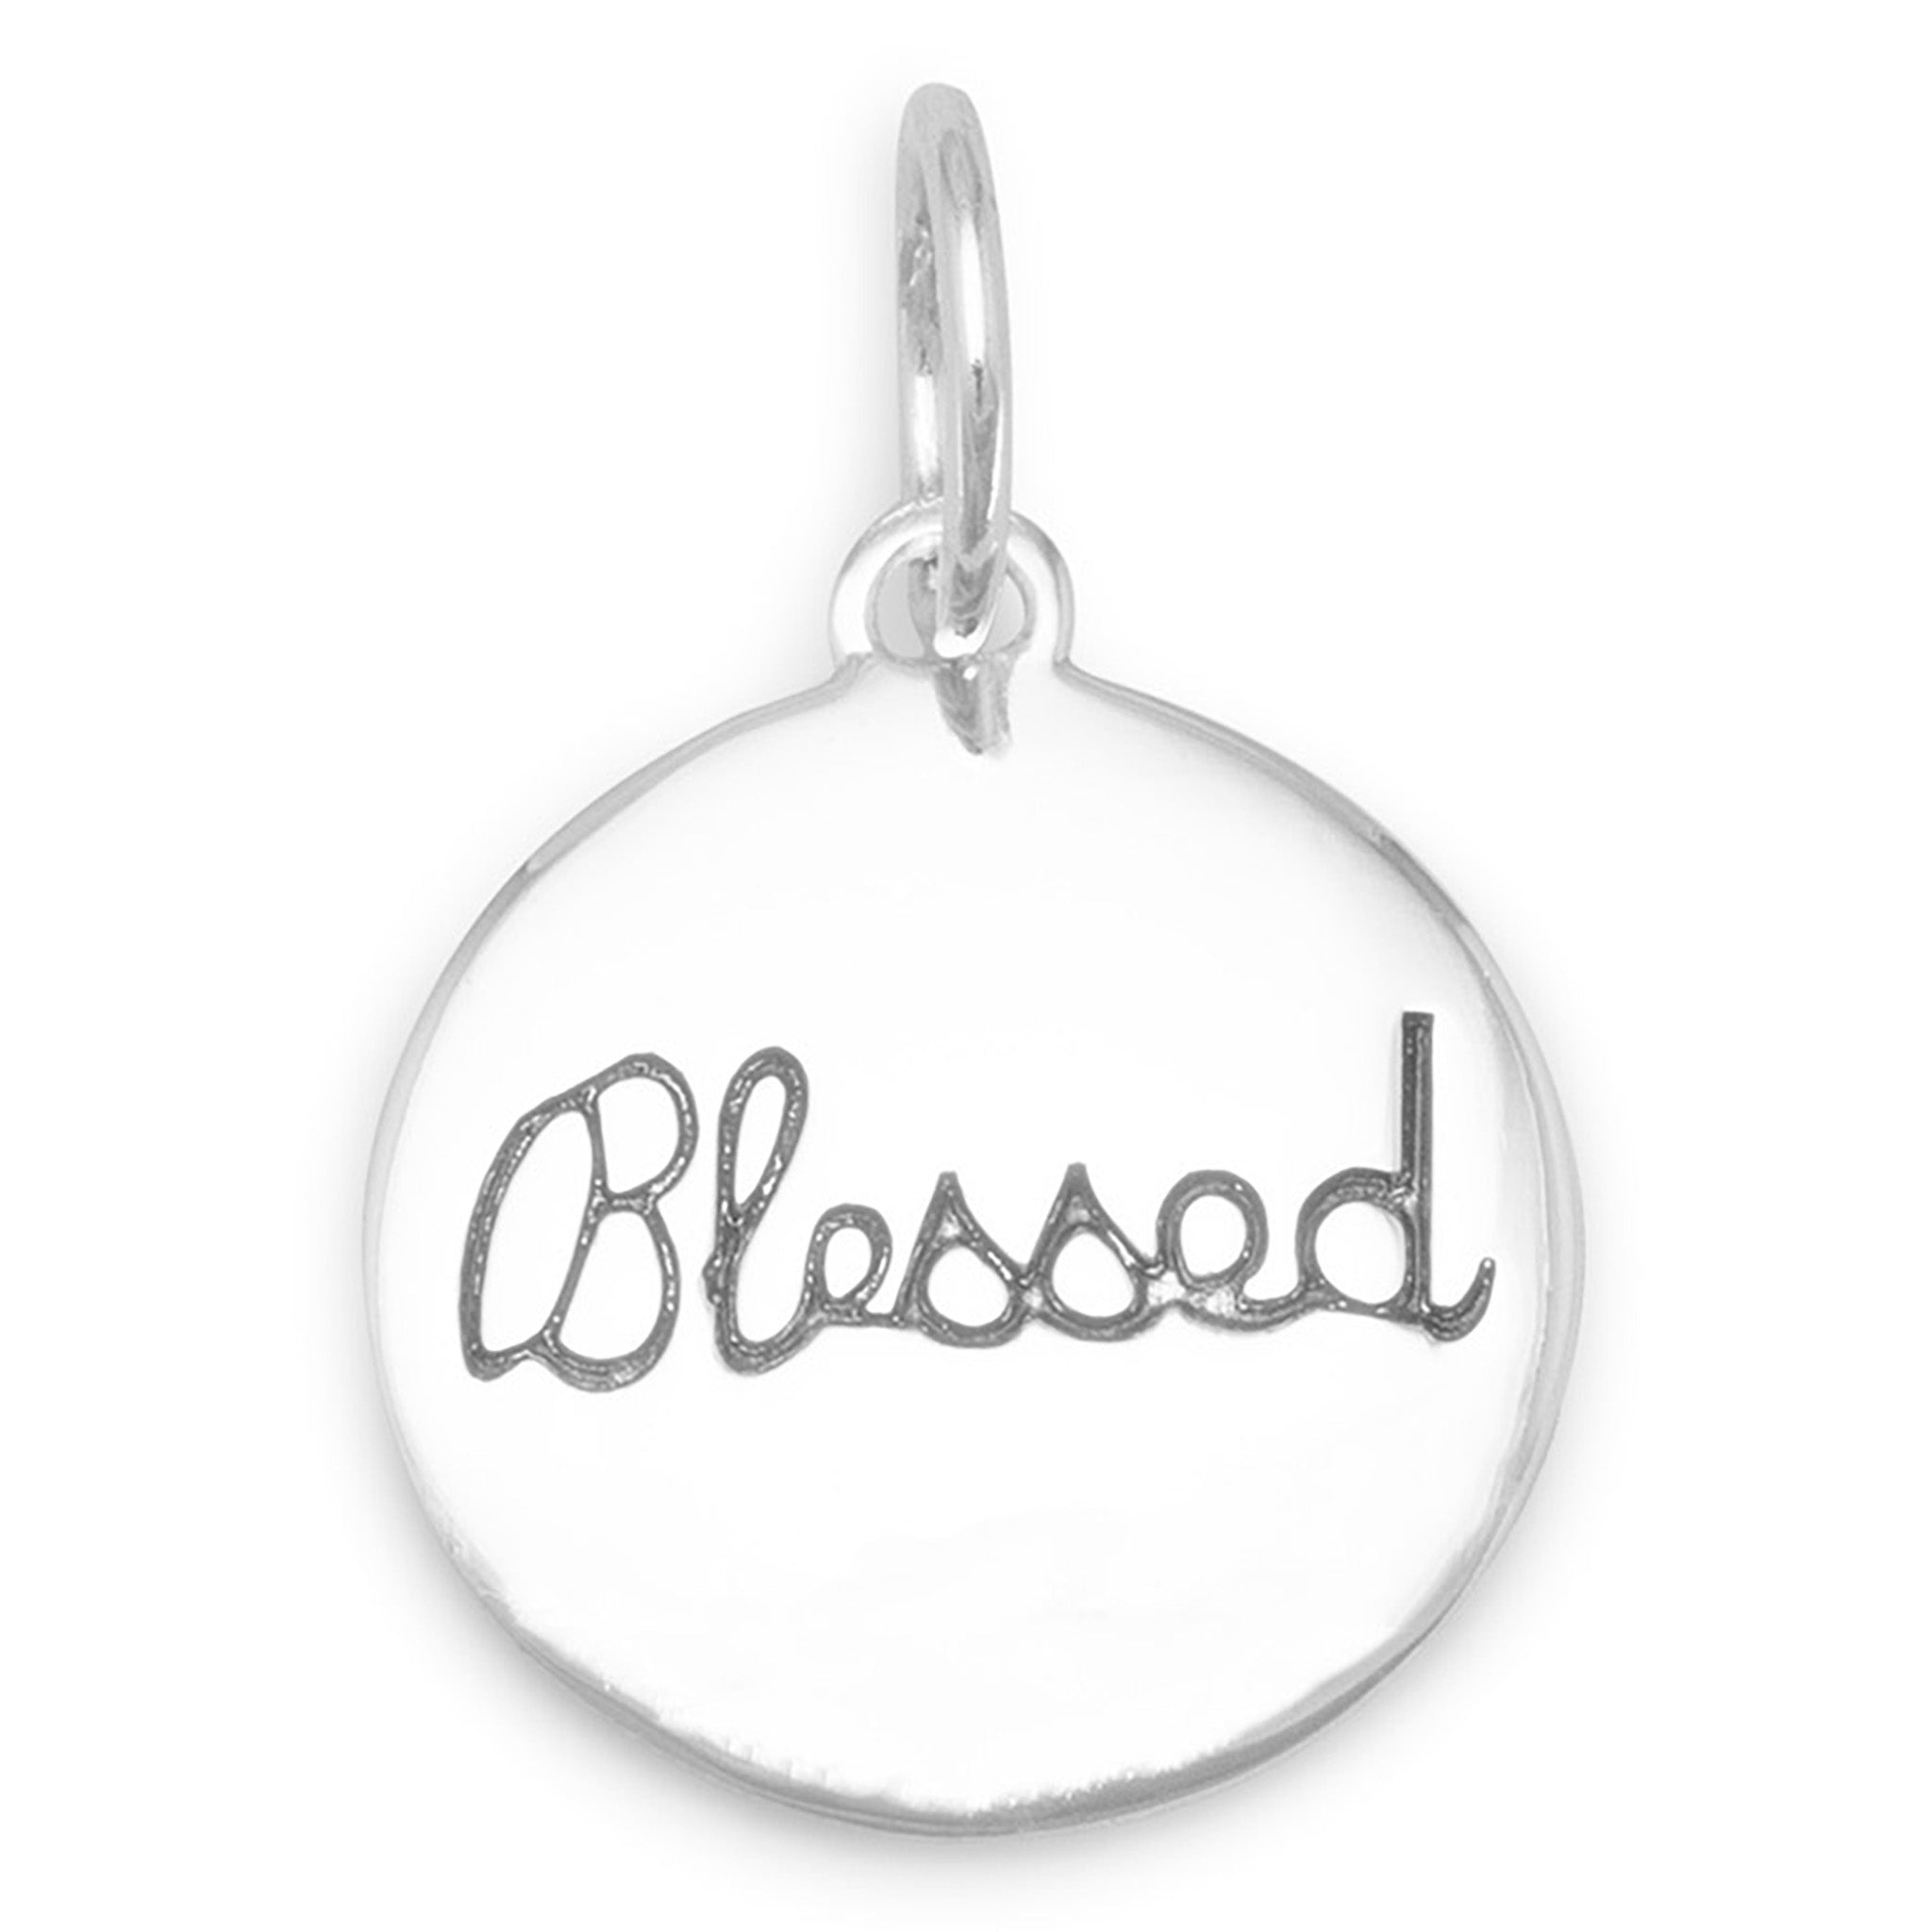 Engraved Blessed Charm